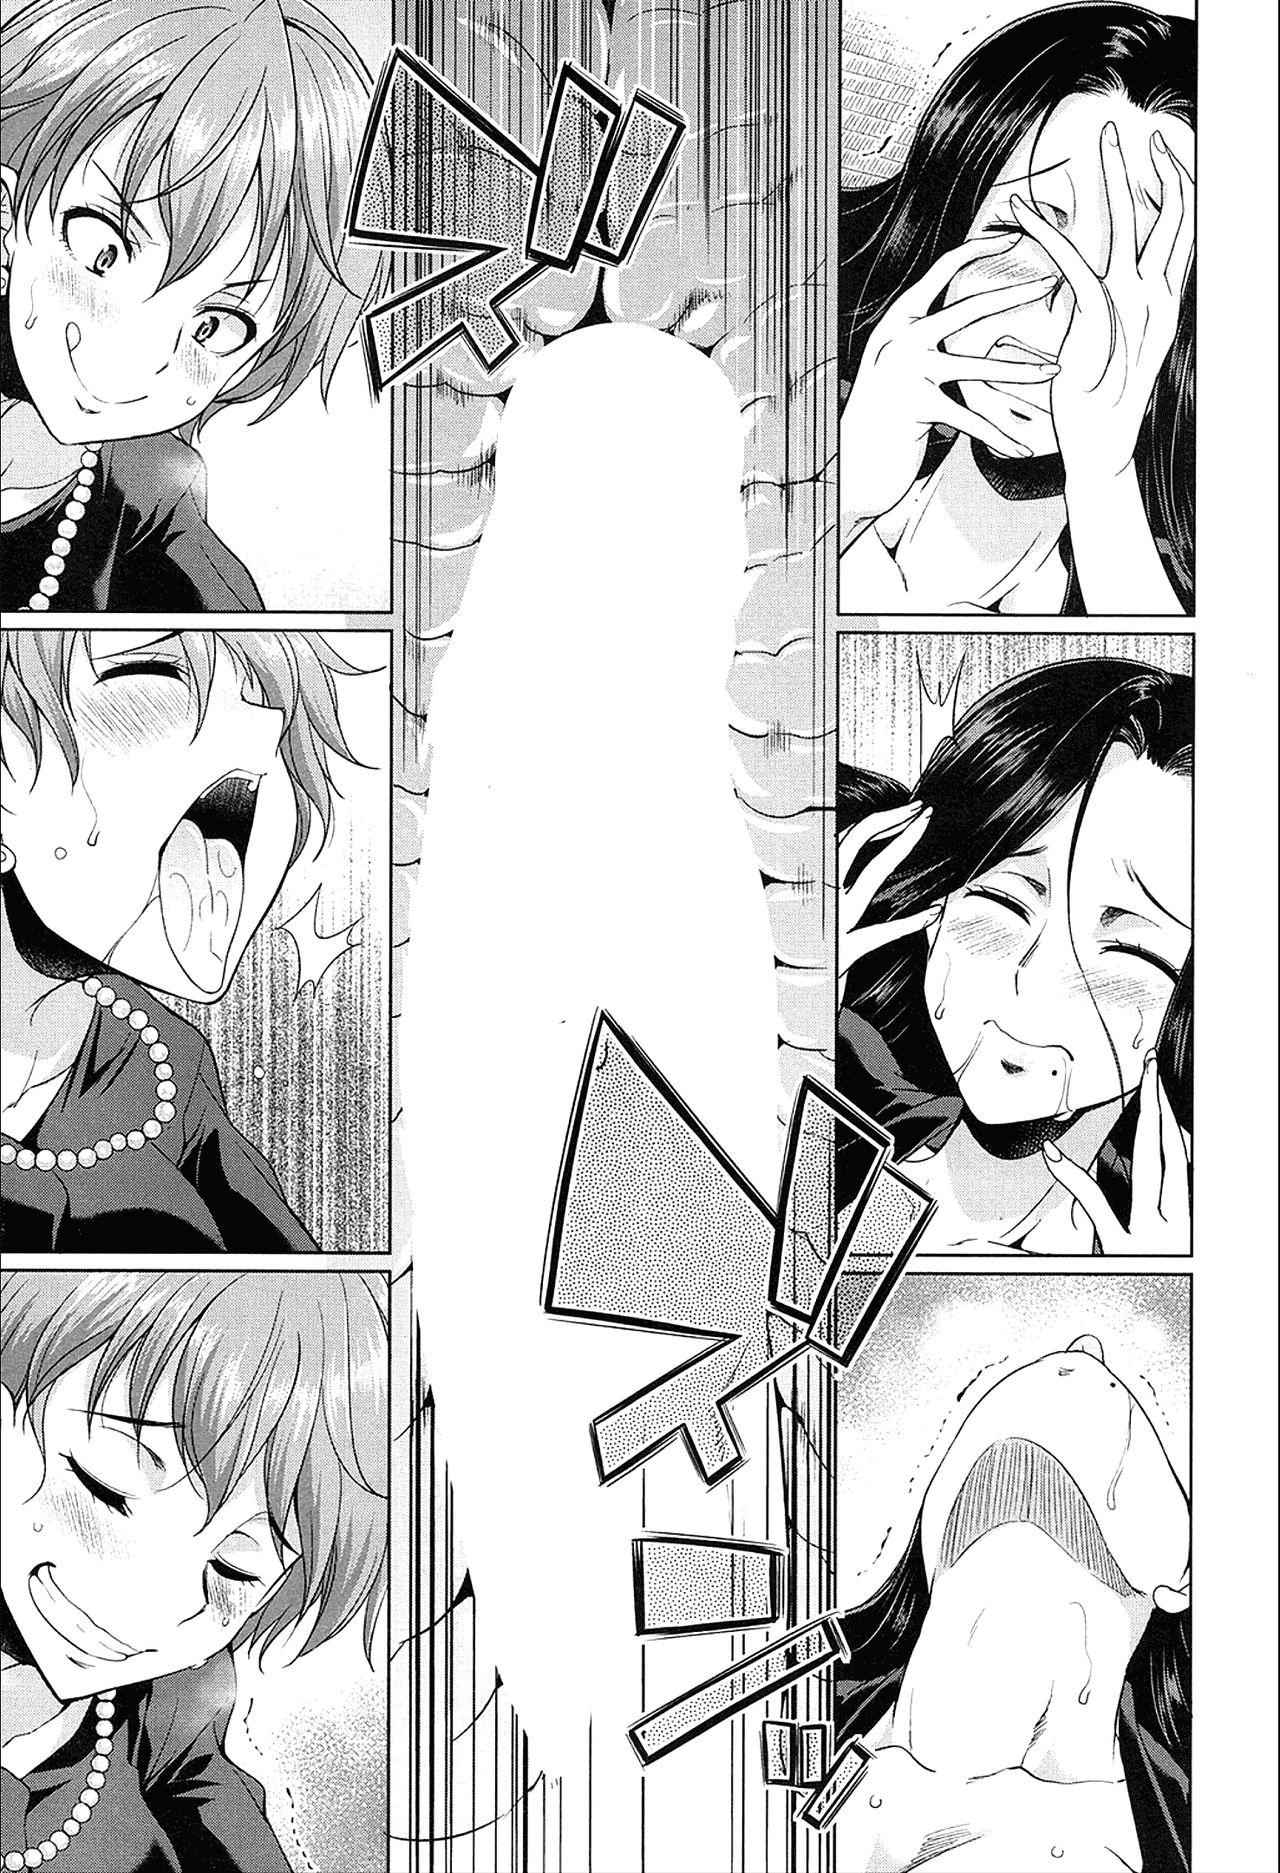 The Relationship of the Sisters-in-Law [English] [Rewrite] 25